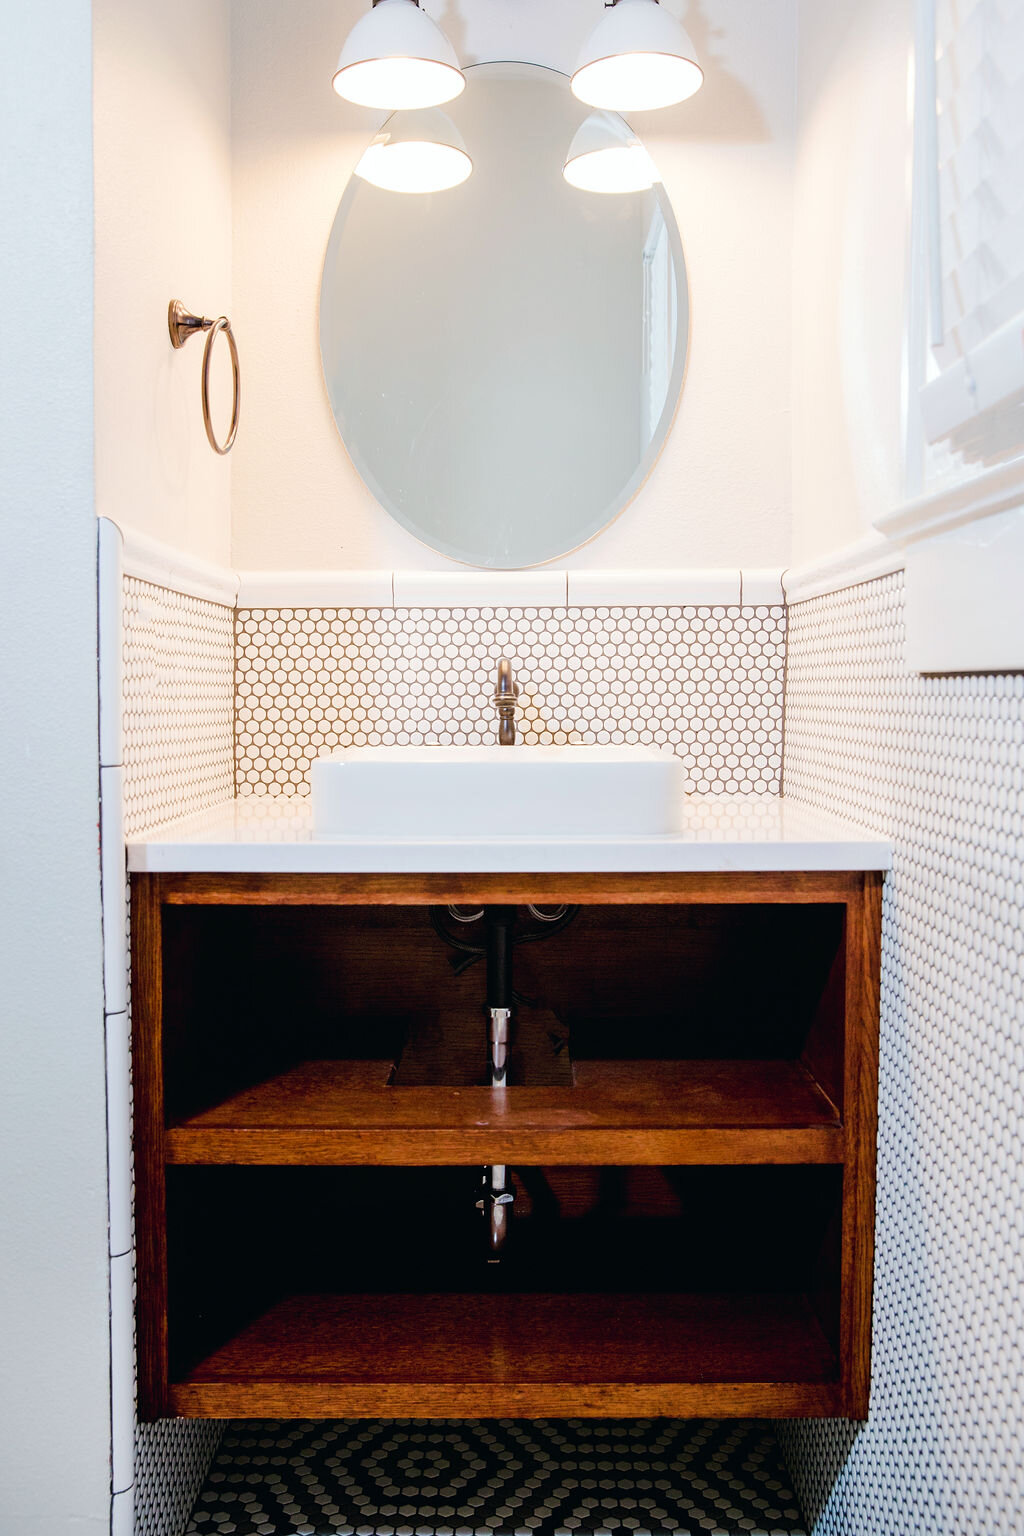 How to Make a Small Bathroom Appear Larger